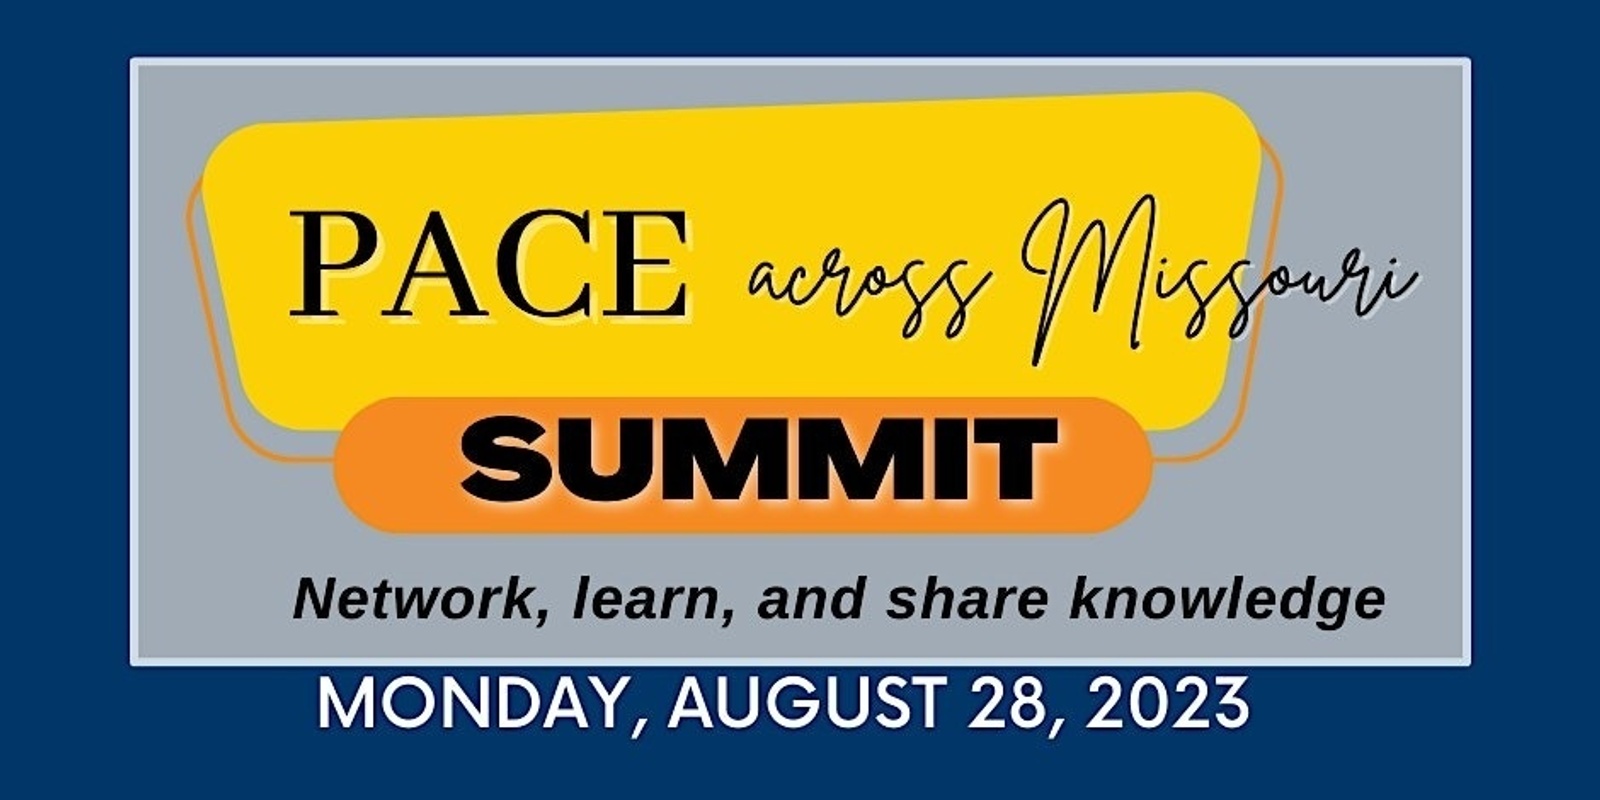 Banner image for PACE across Missouri Summit (hybrid event)